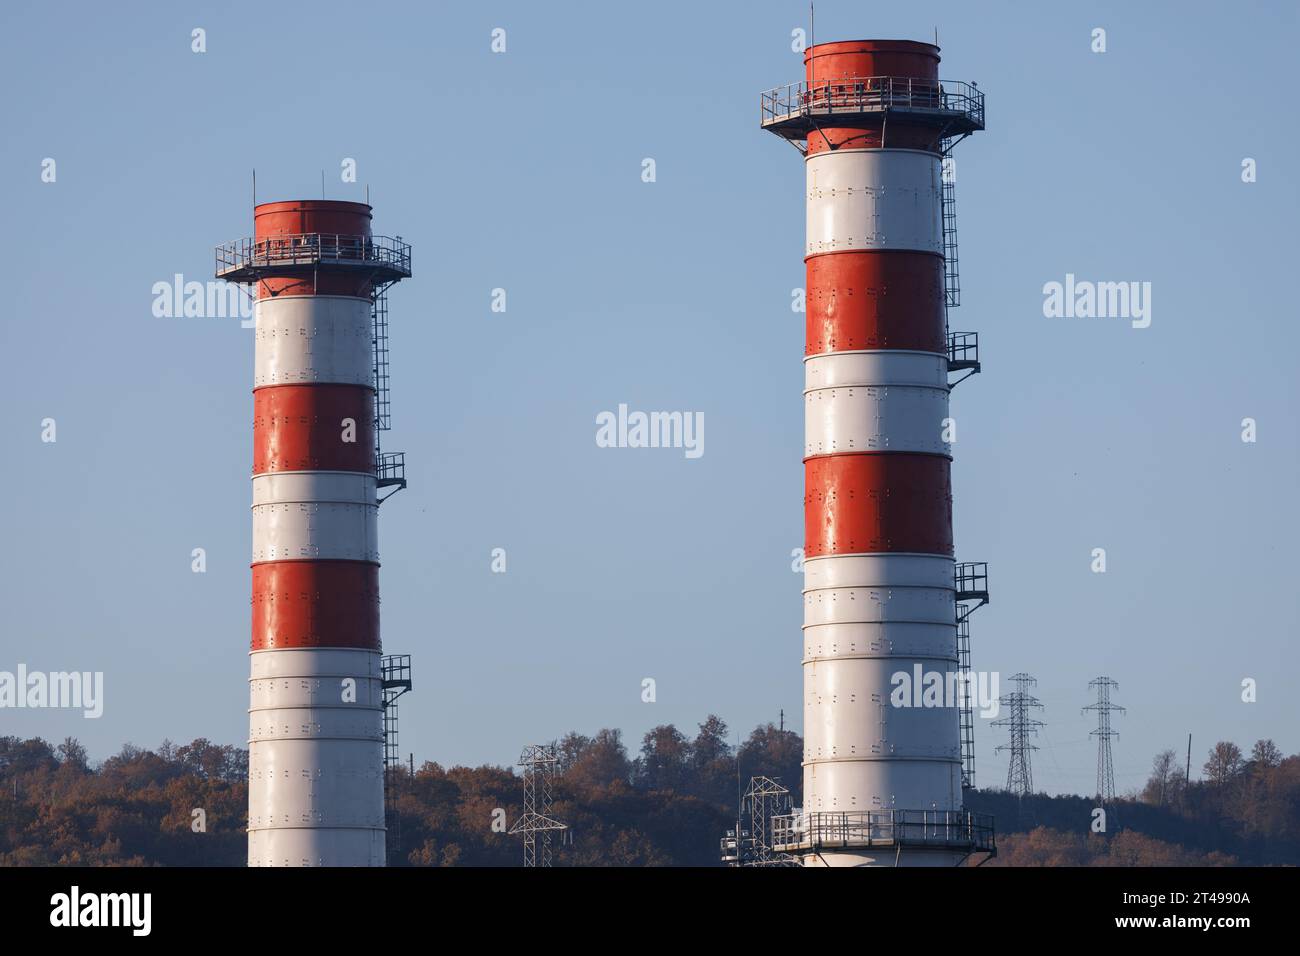 Power plant with two red and white pipes Environmentally friendly gas energy Stock Photo